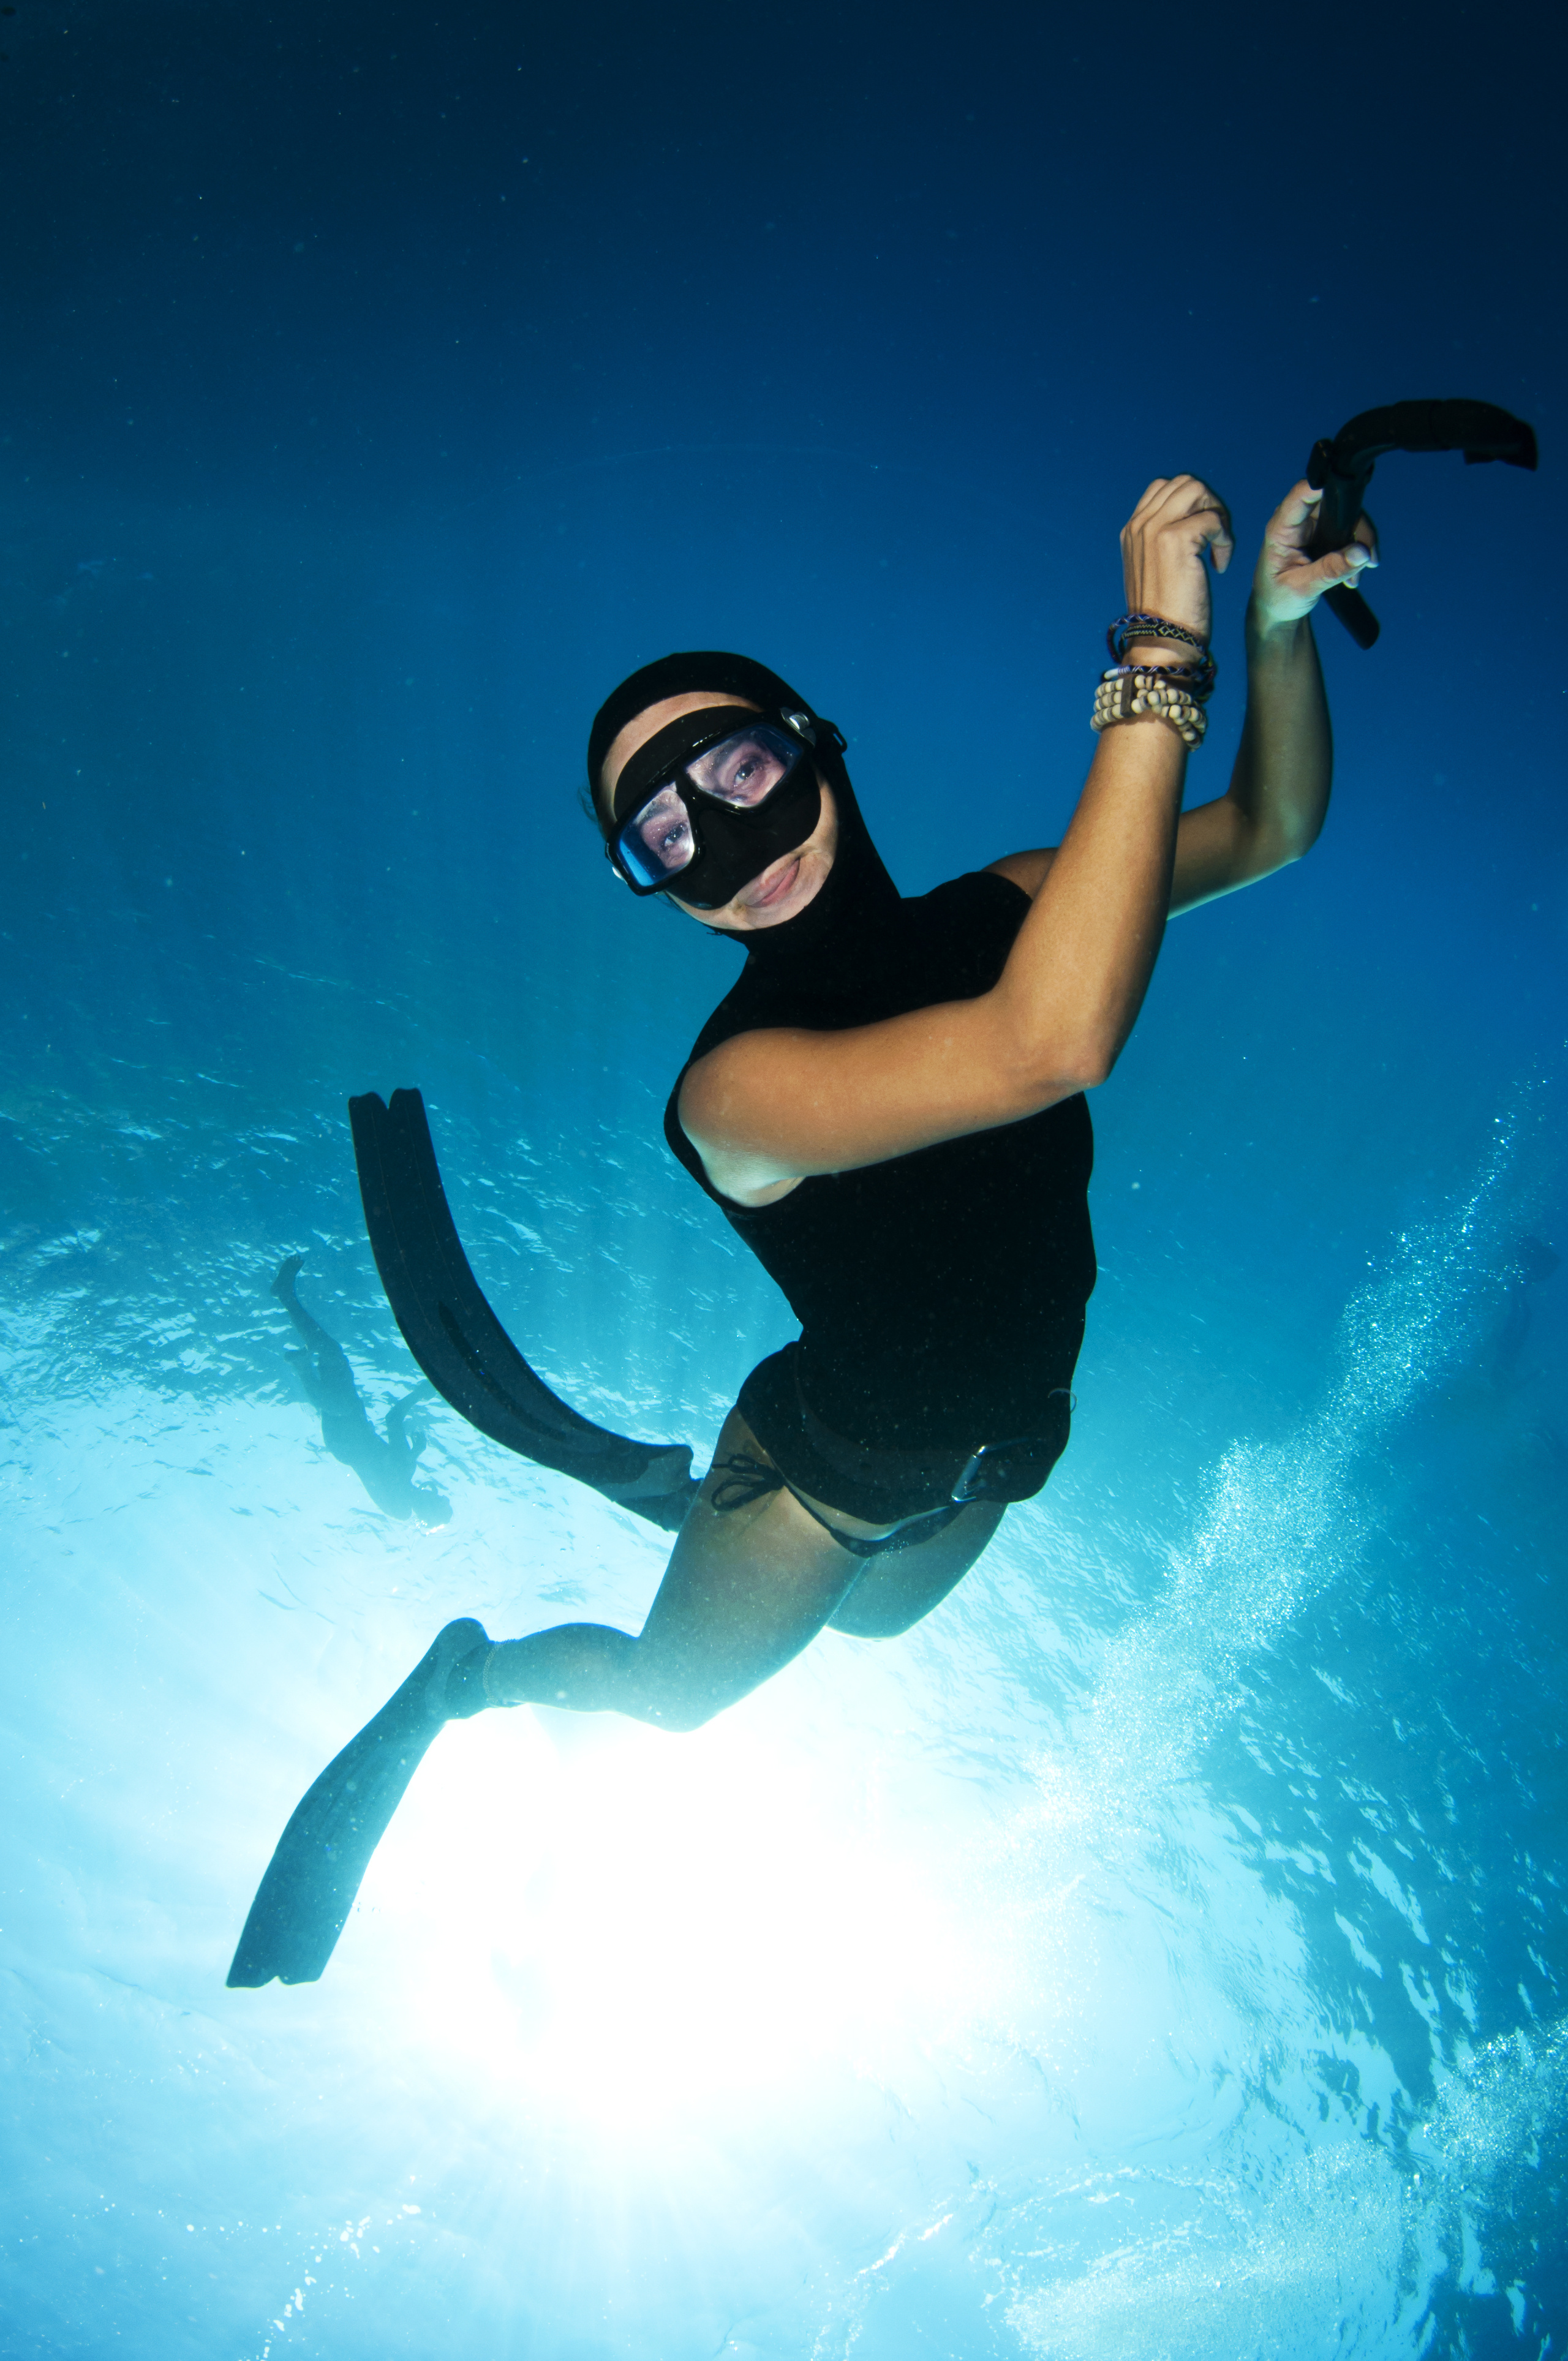 Female freediver smiles for the camera as she enjoys the scenery while practices her skills